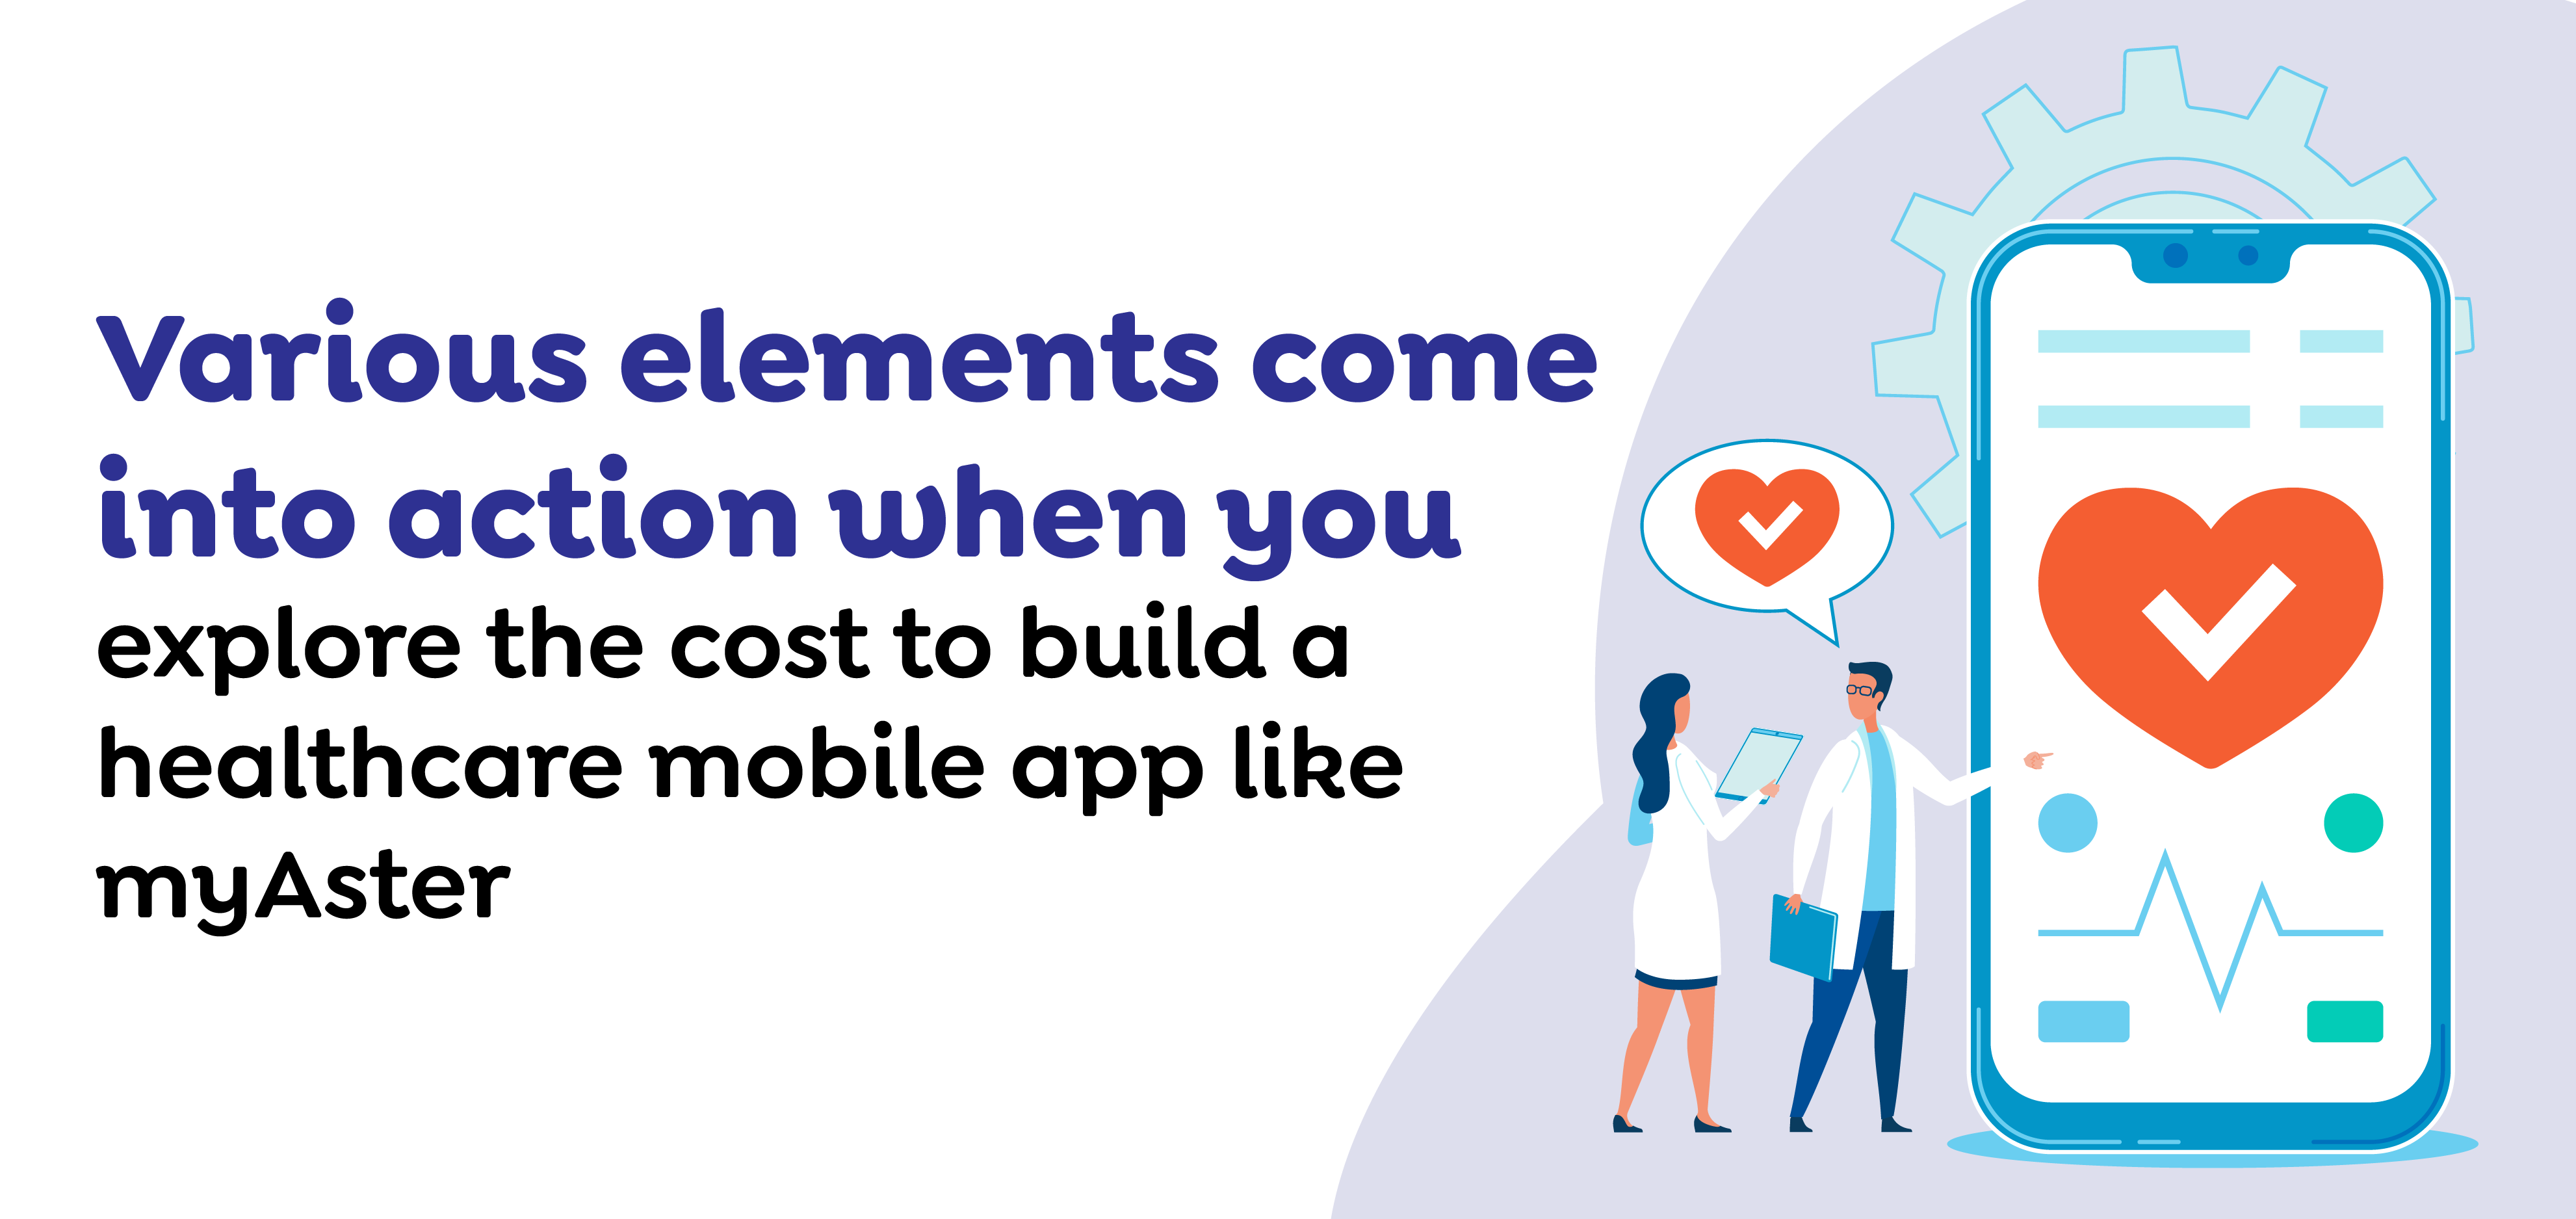 Various elements come into action when you explore the cost to build a healthcare mobile app like my